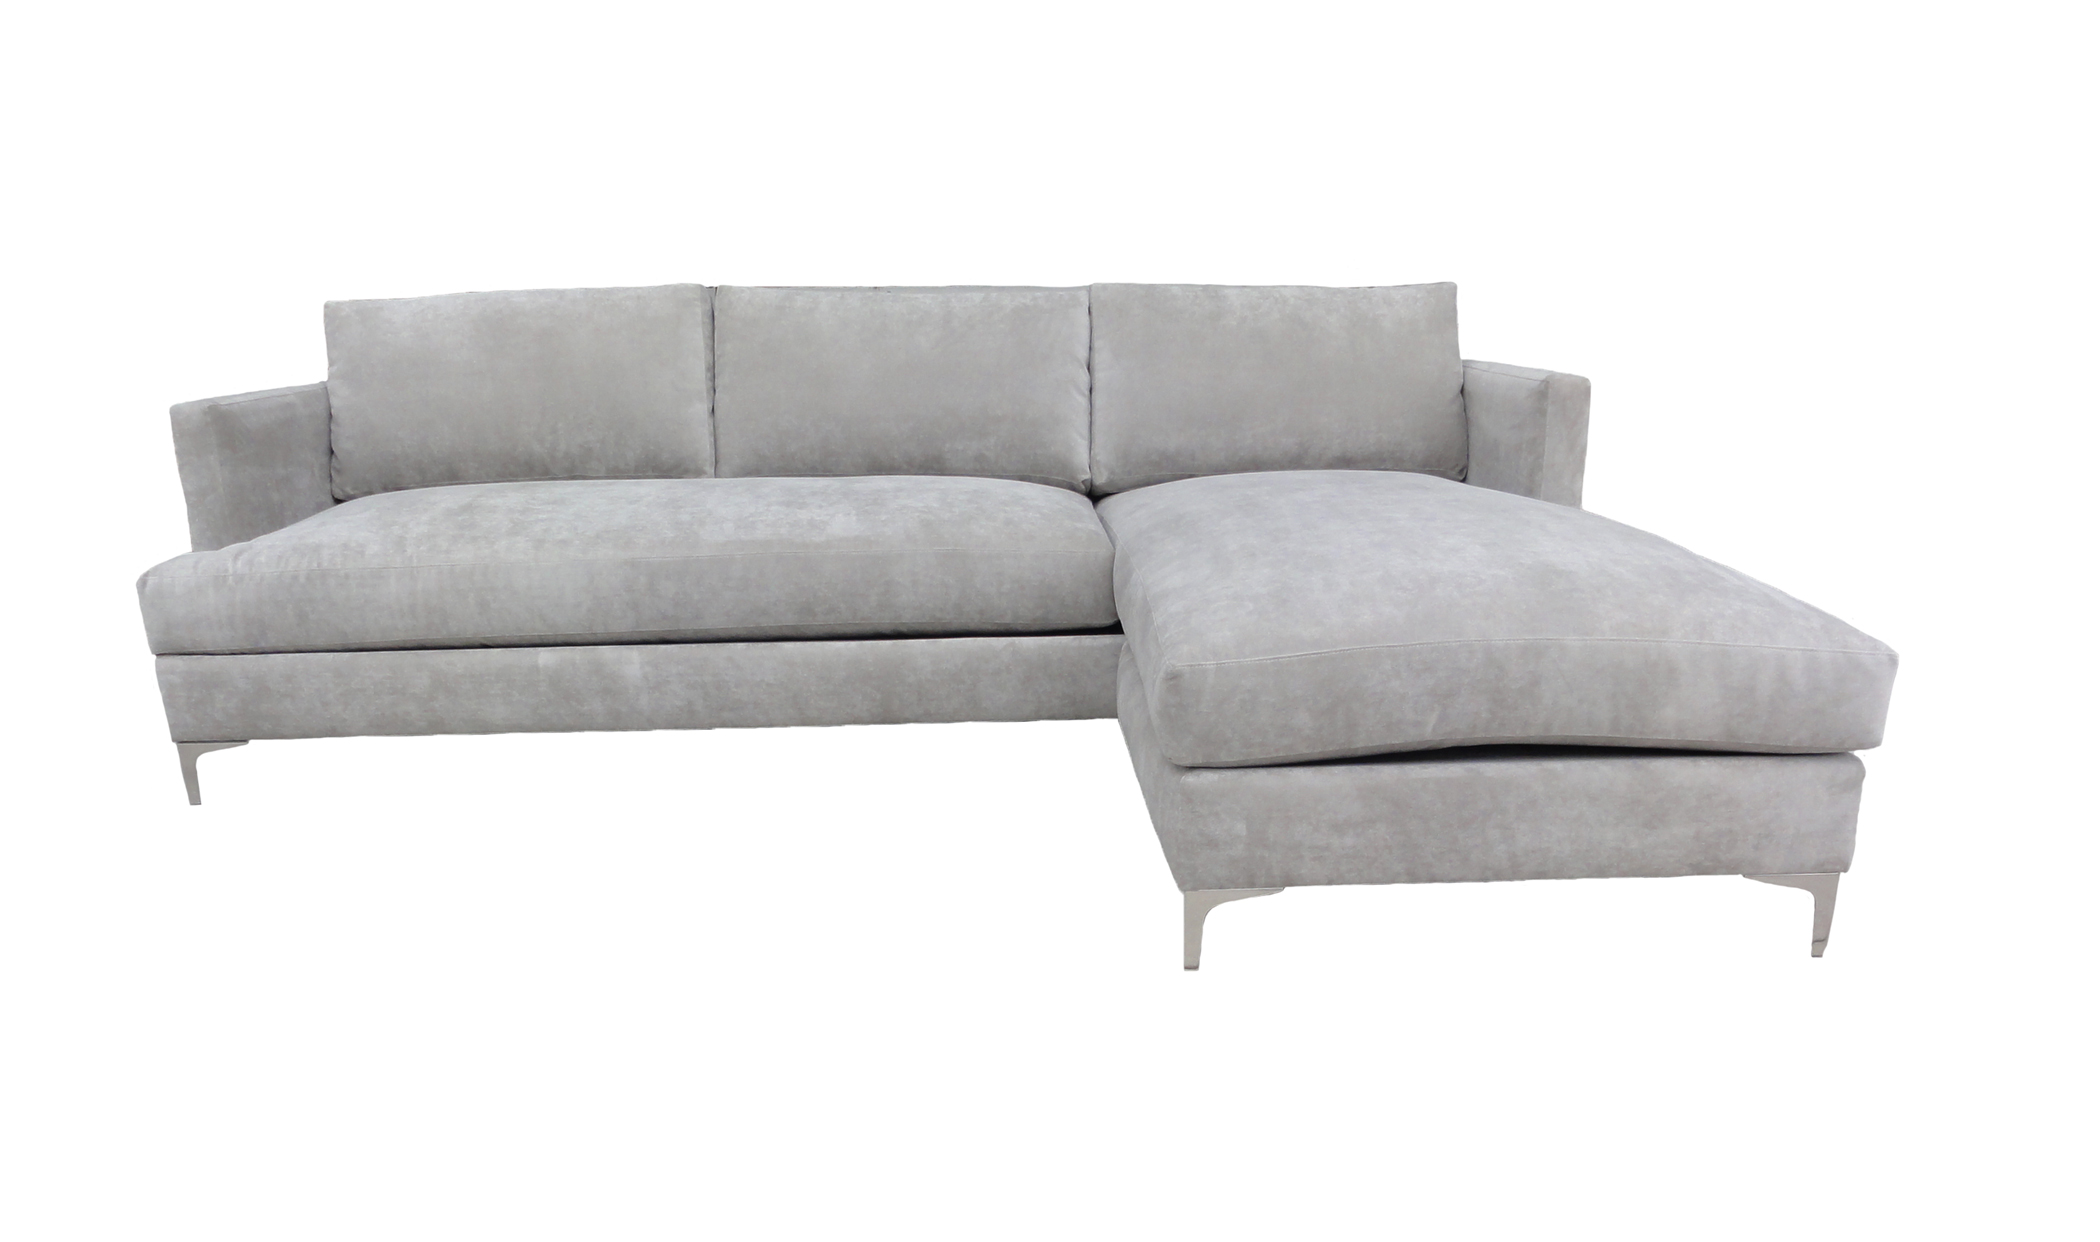 Summerland Sectional With Reversible Chaise santa barbara design center -